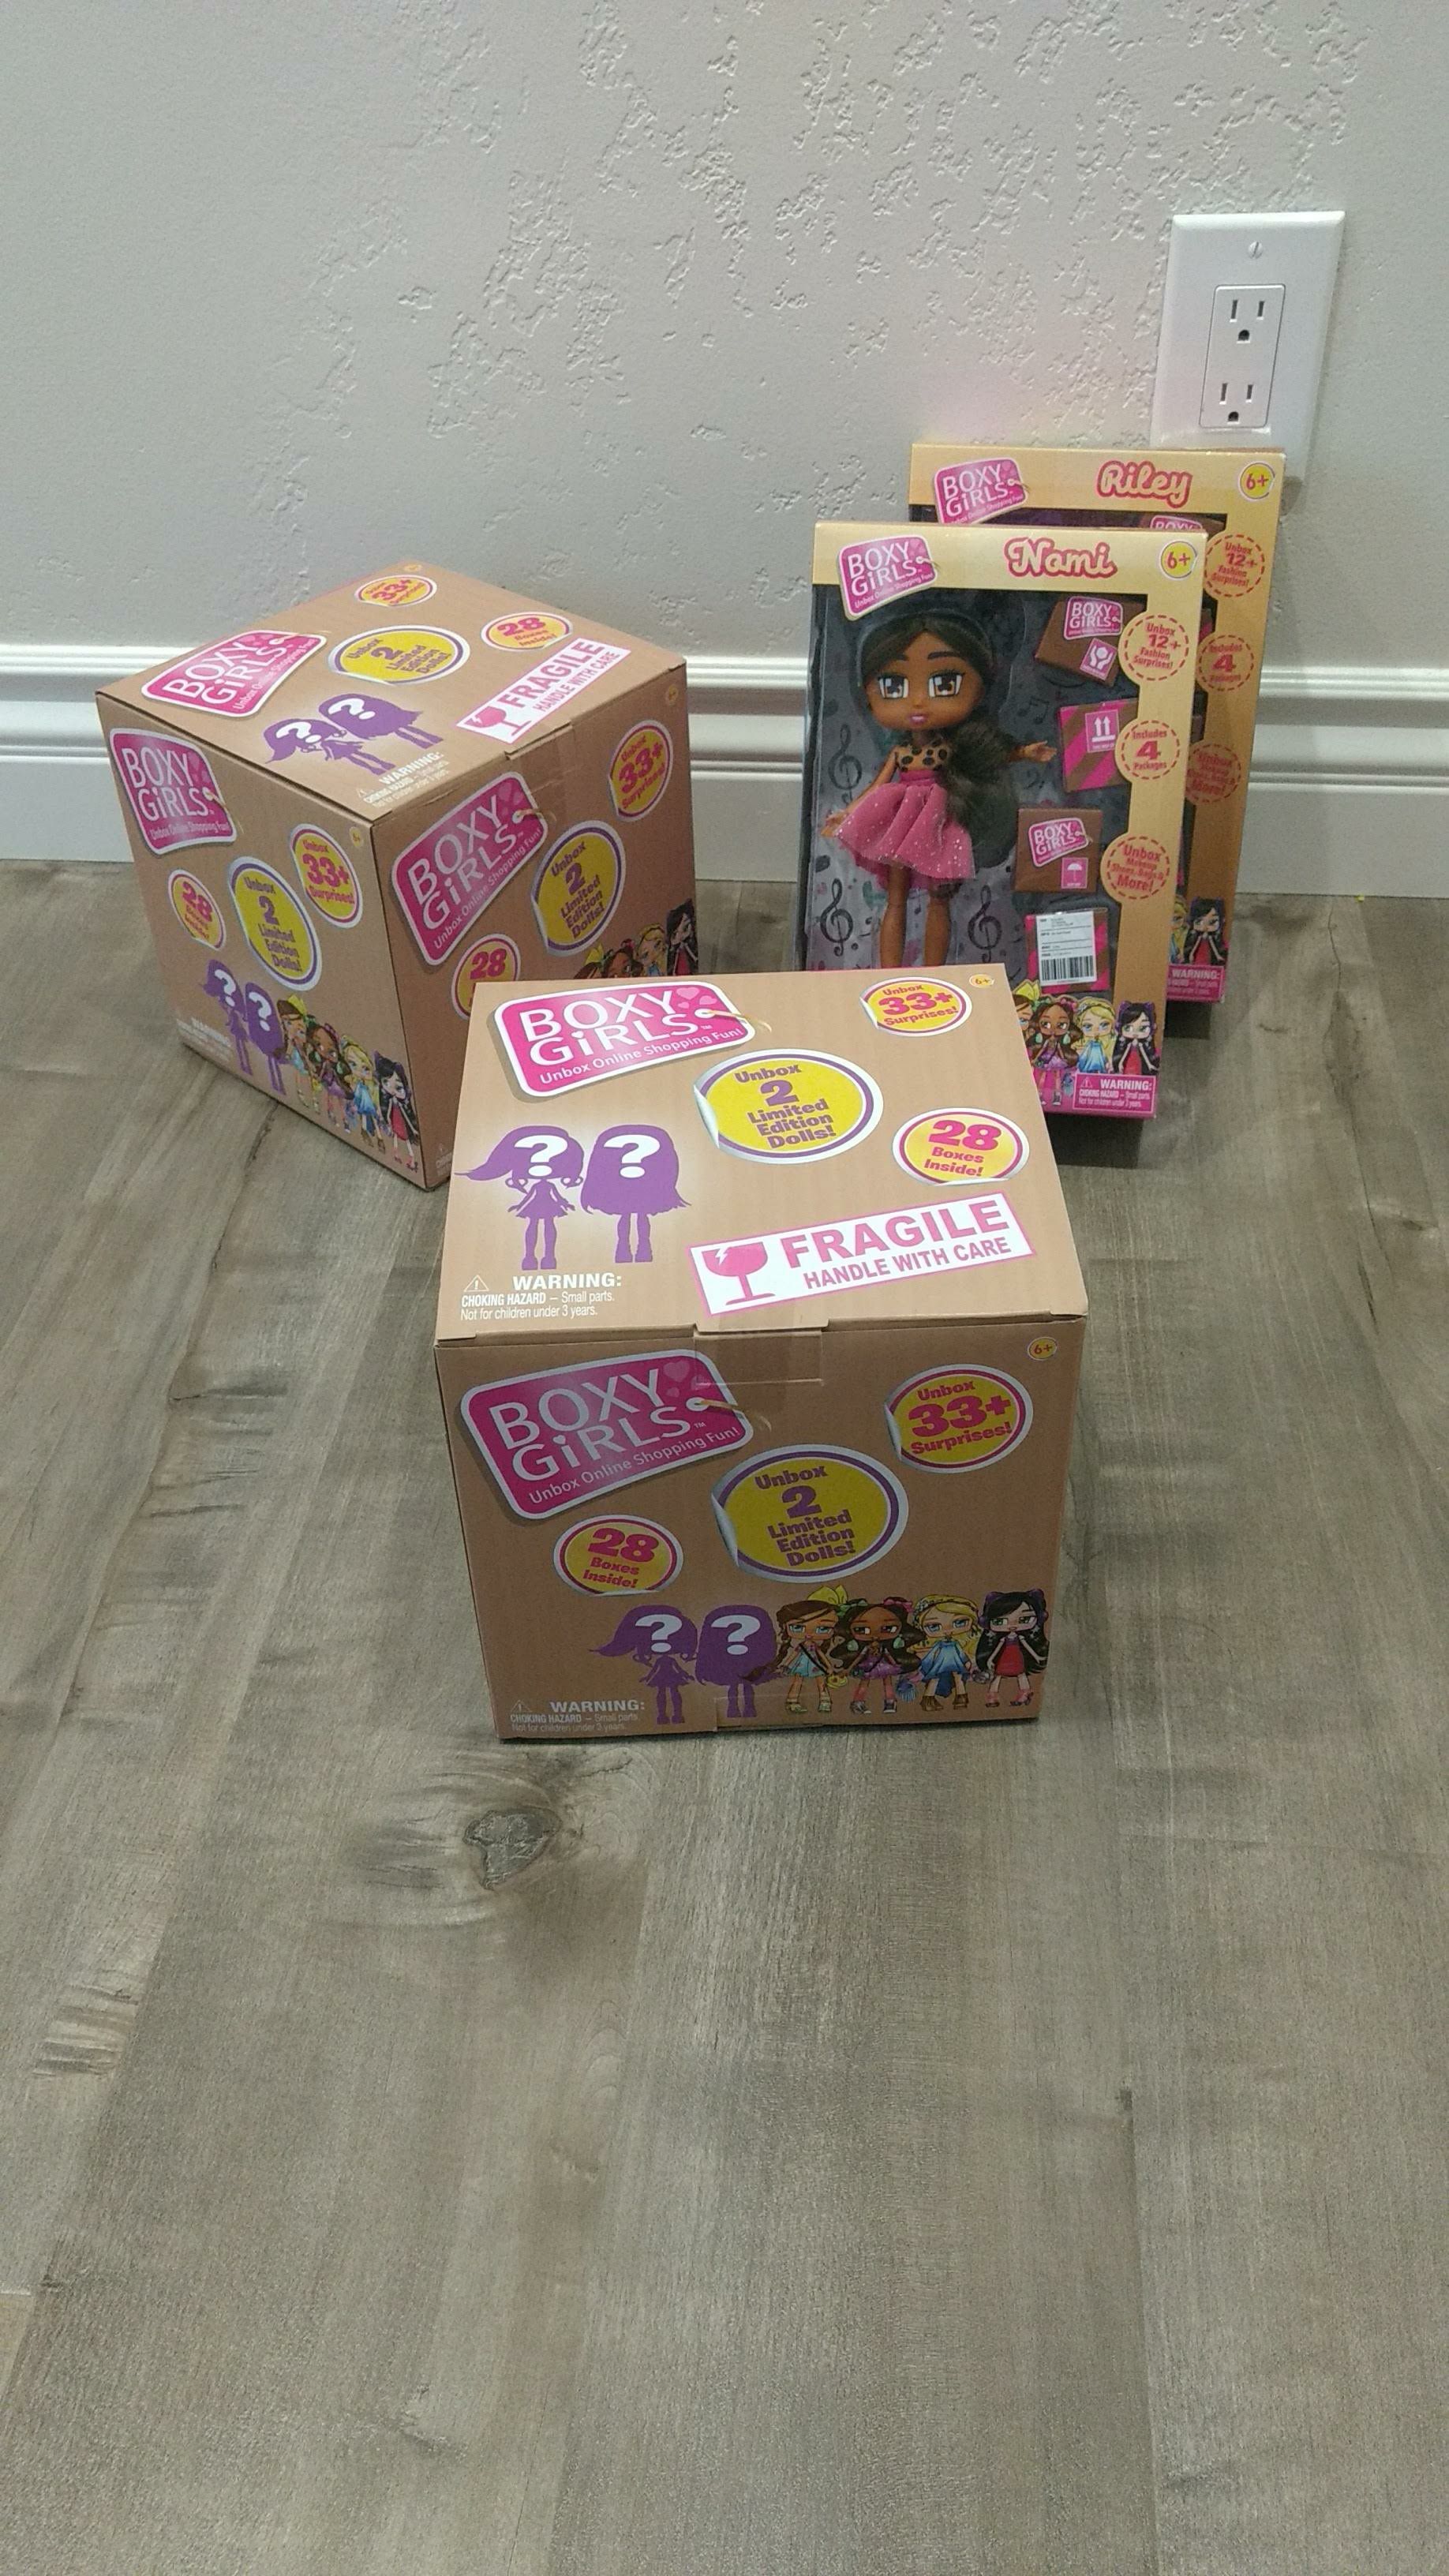 Dolls for girl. Boxy girls. Barbie like. With accessories.